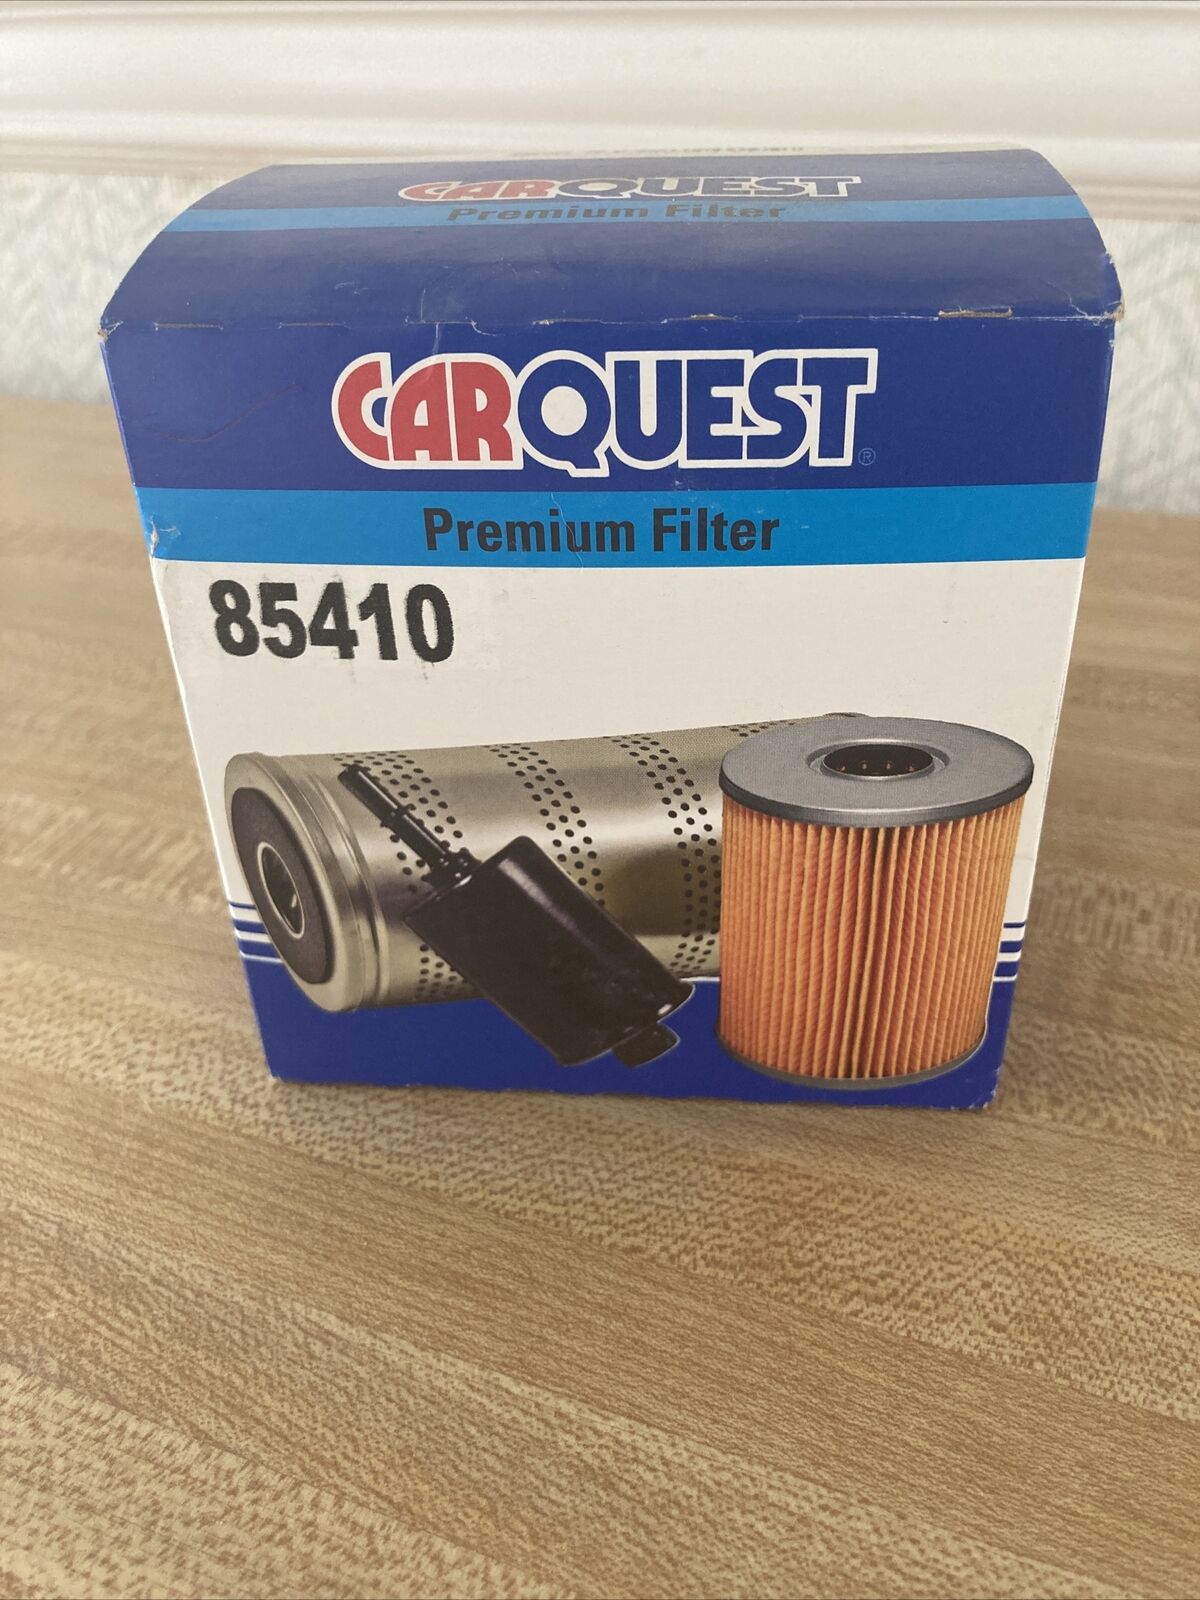 New Carquest 85410 Hydraulic Filter Replaces PH2844 57102 PL20081 PH710 LF379